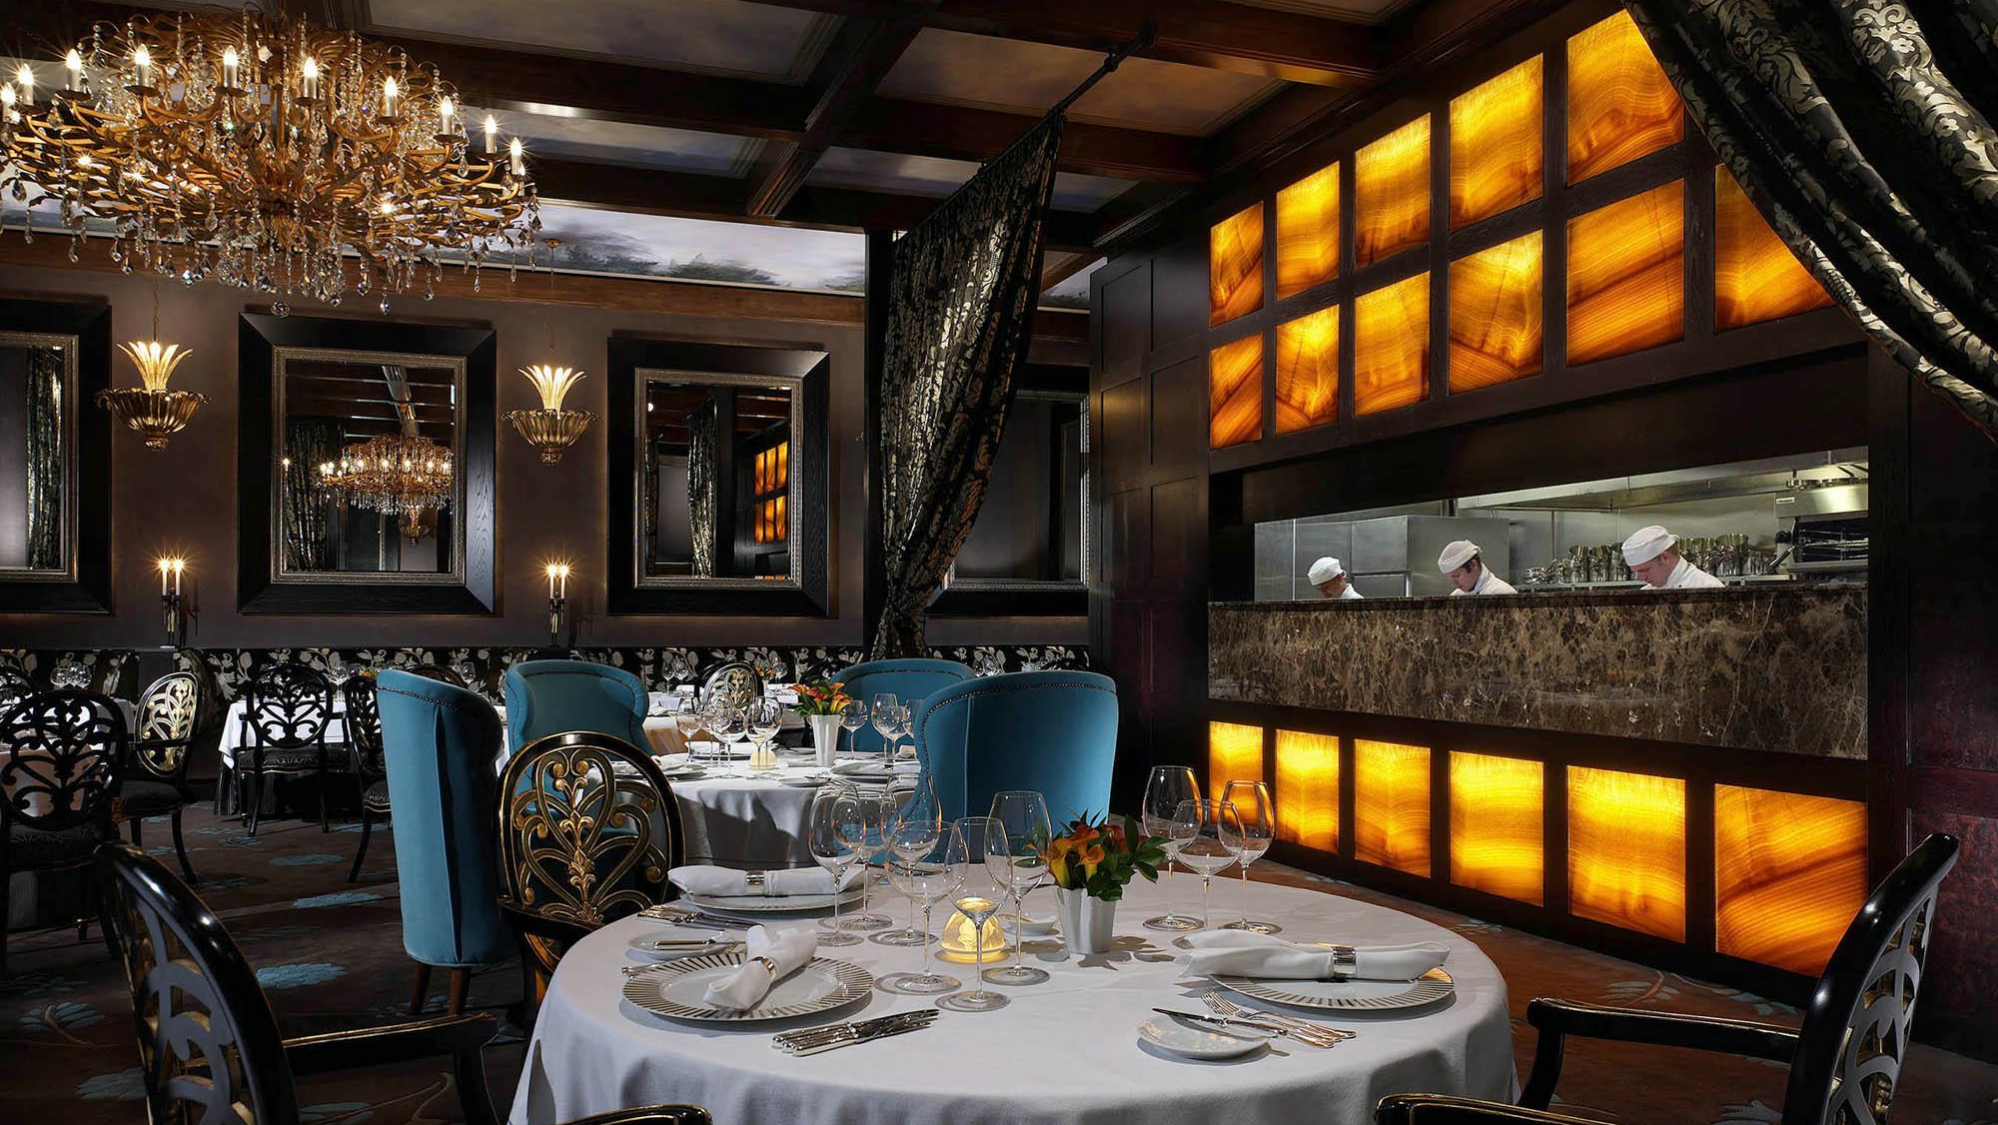 How To Enjoy A Fancy Restaurant. Five essential tips for dining with